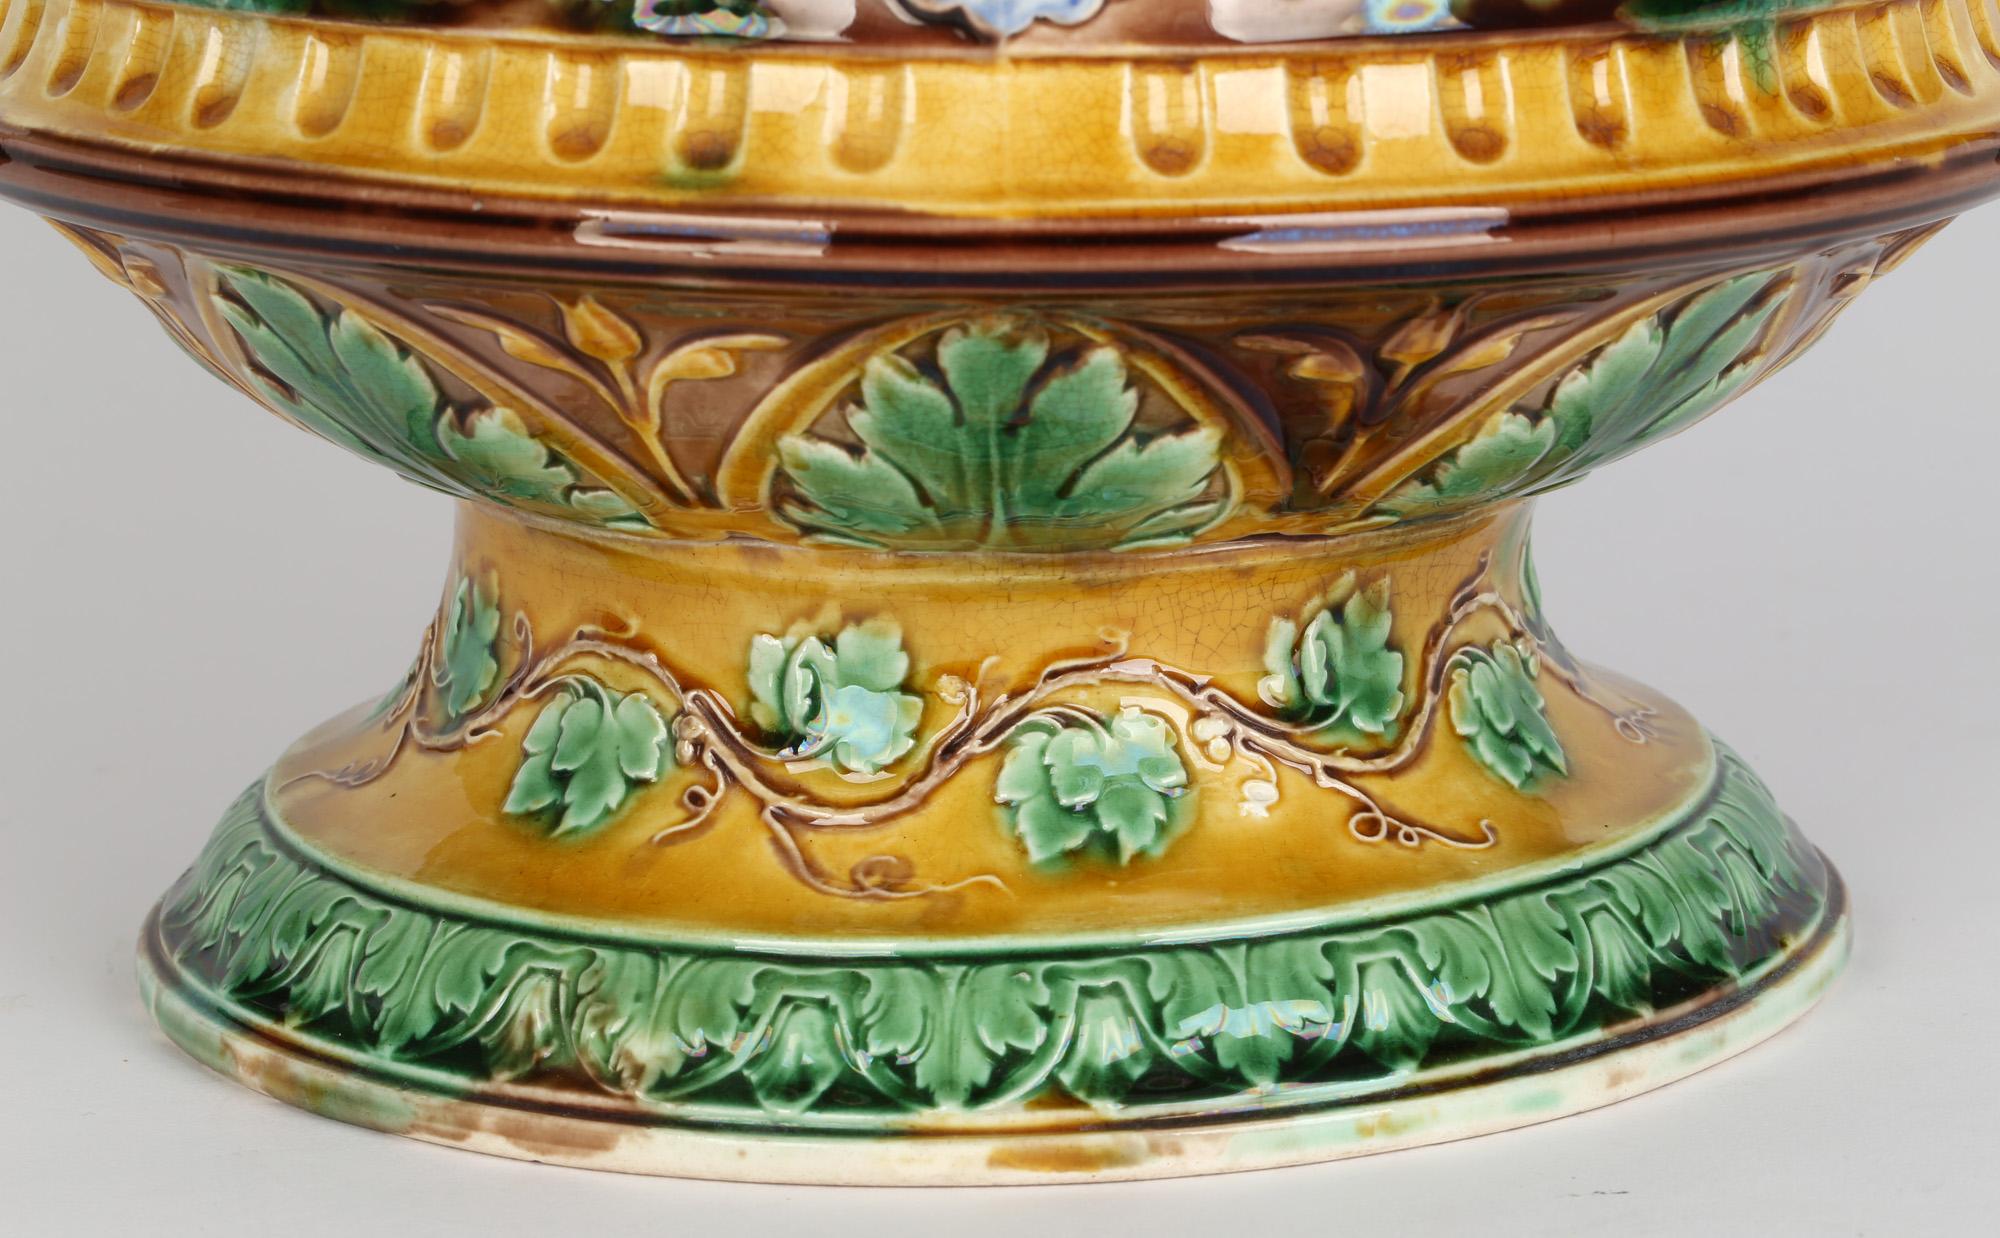 Wedgwood Large and Impressive Majolica Jardiniere with Masks and Trailing Vines For Sale 12